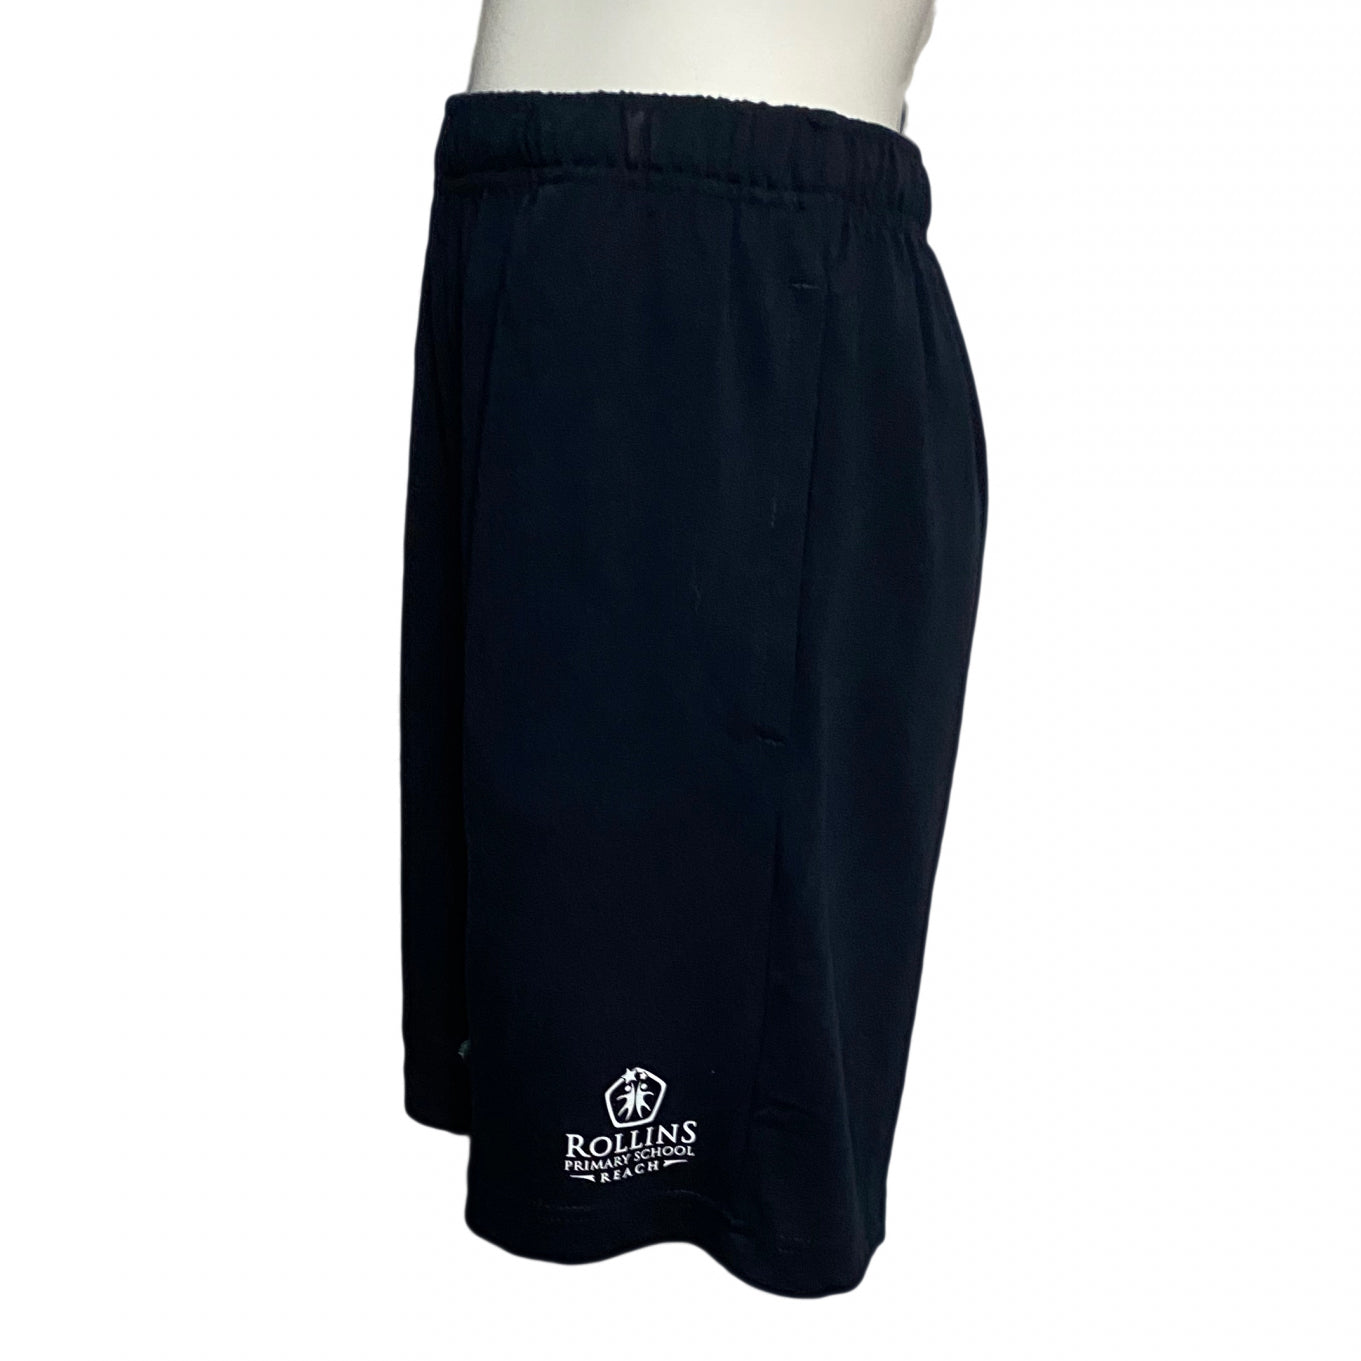 ROLLINS PRIMARY RUGBY KNIT SHORTS